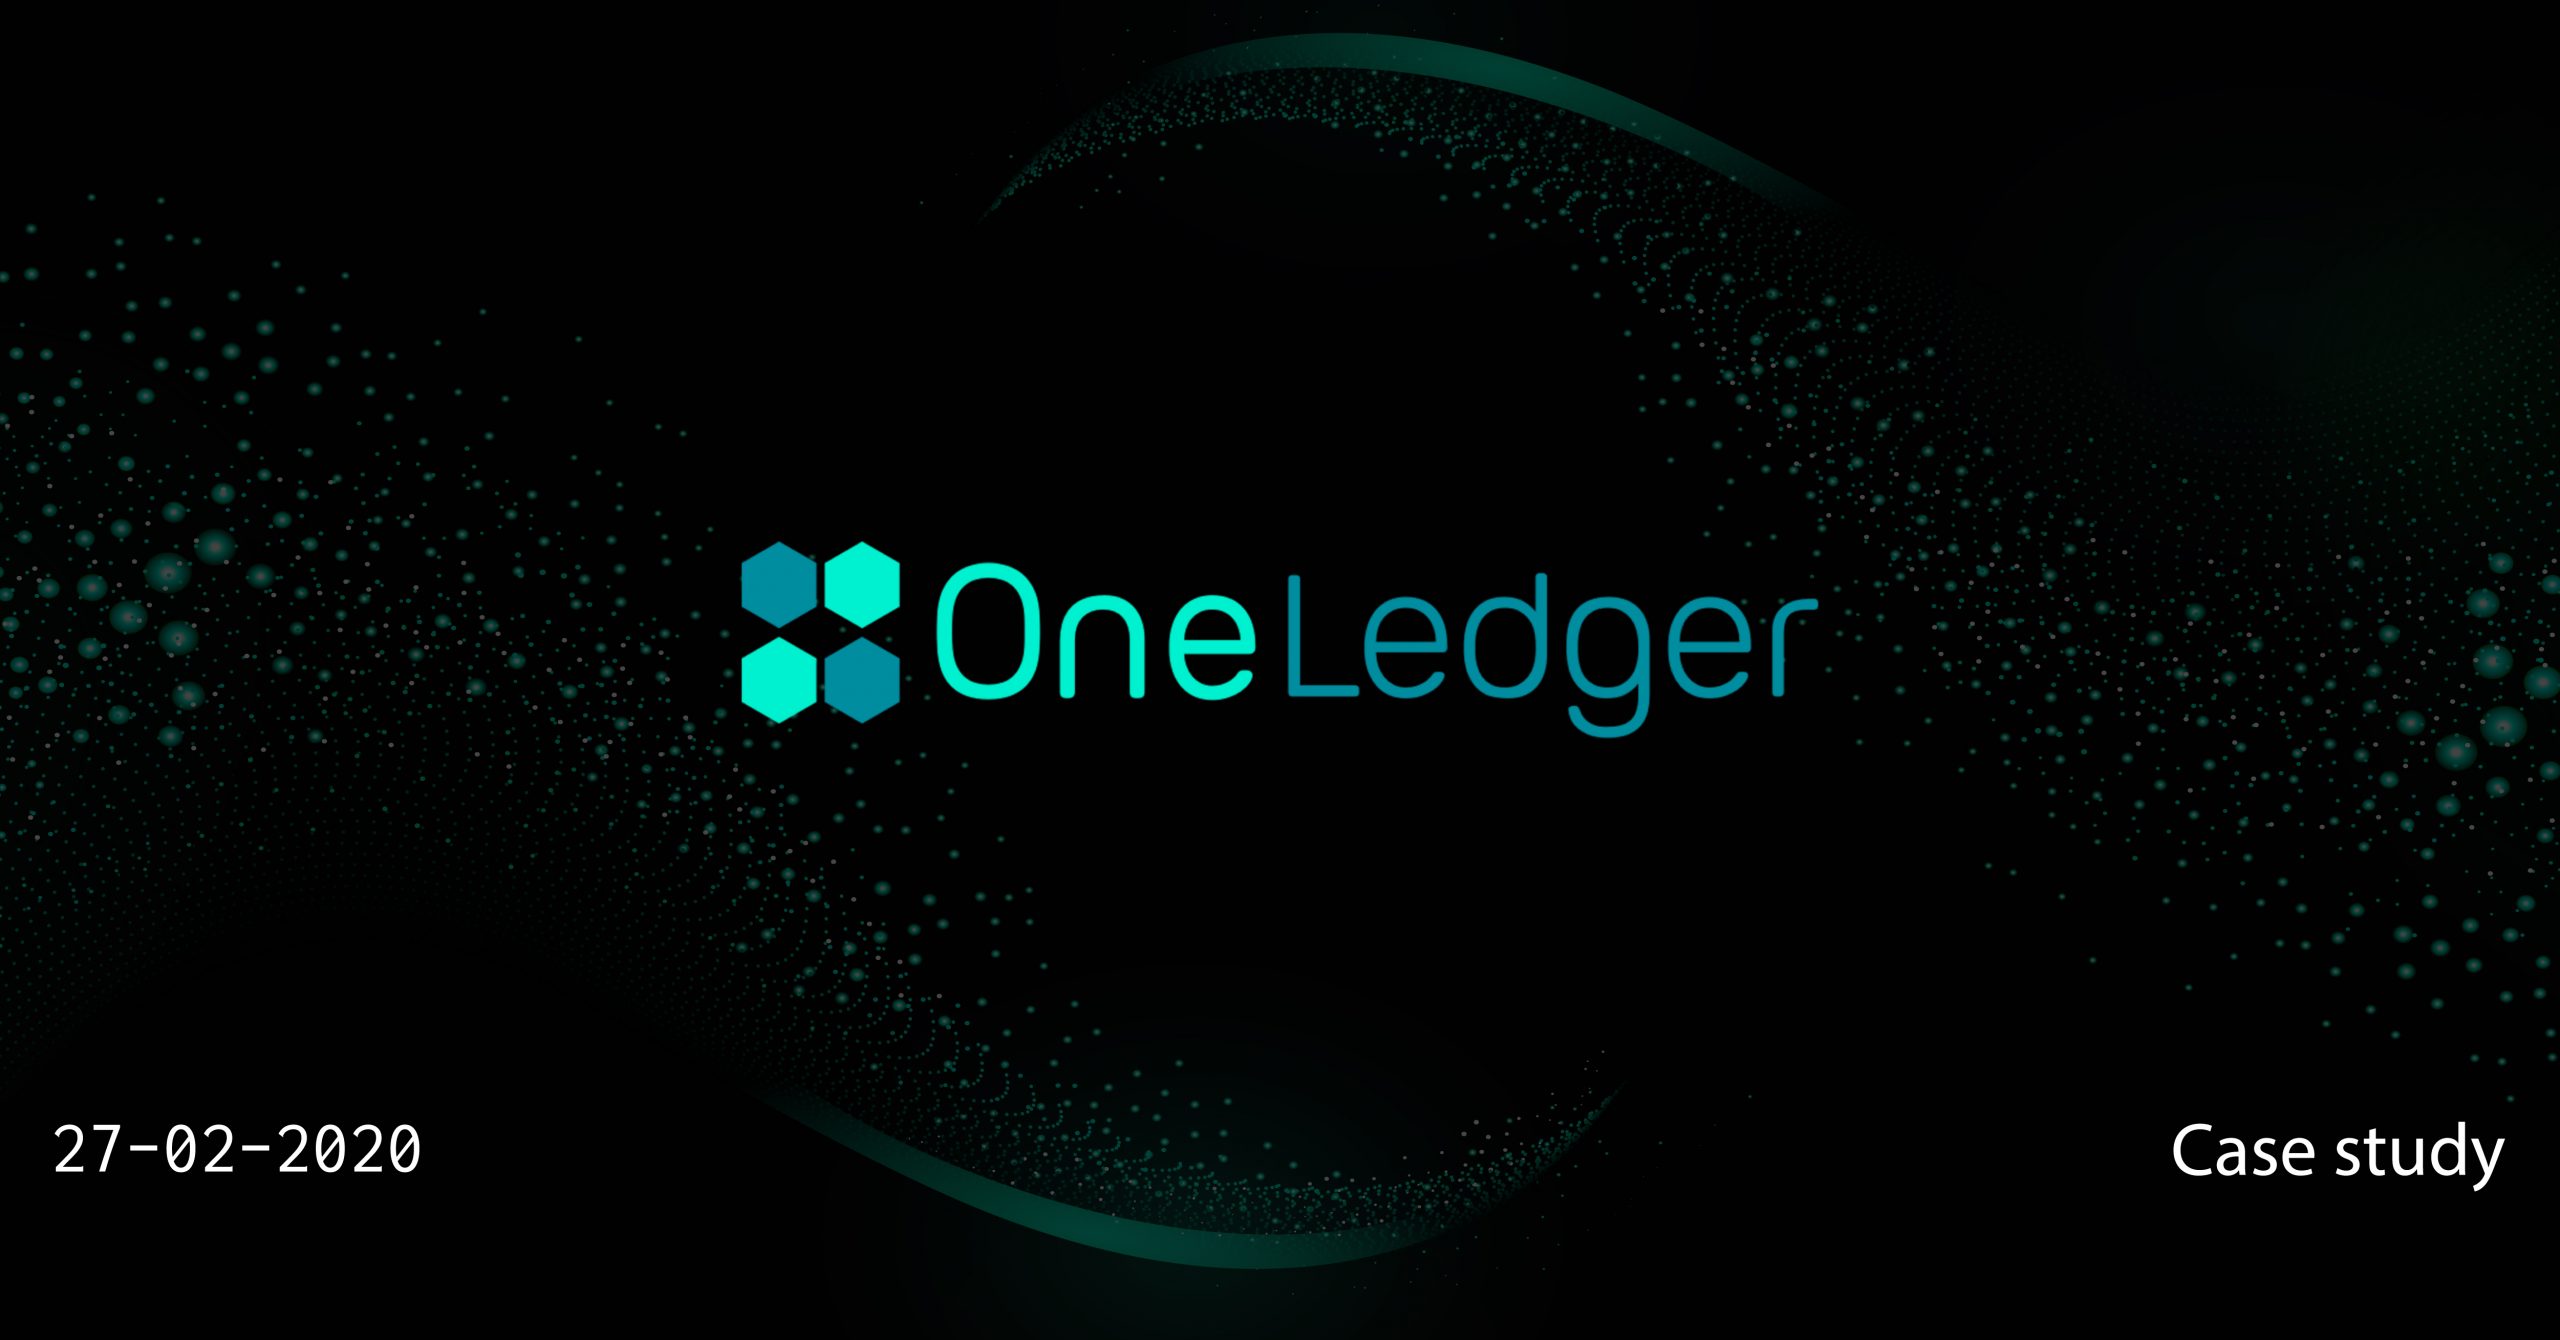 Security analysis of OneLedger